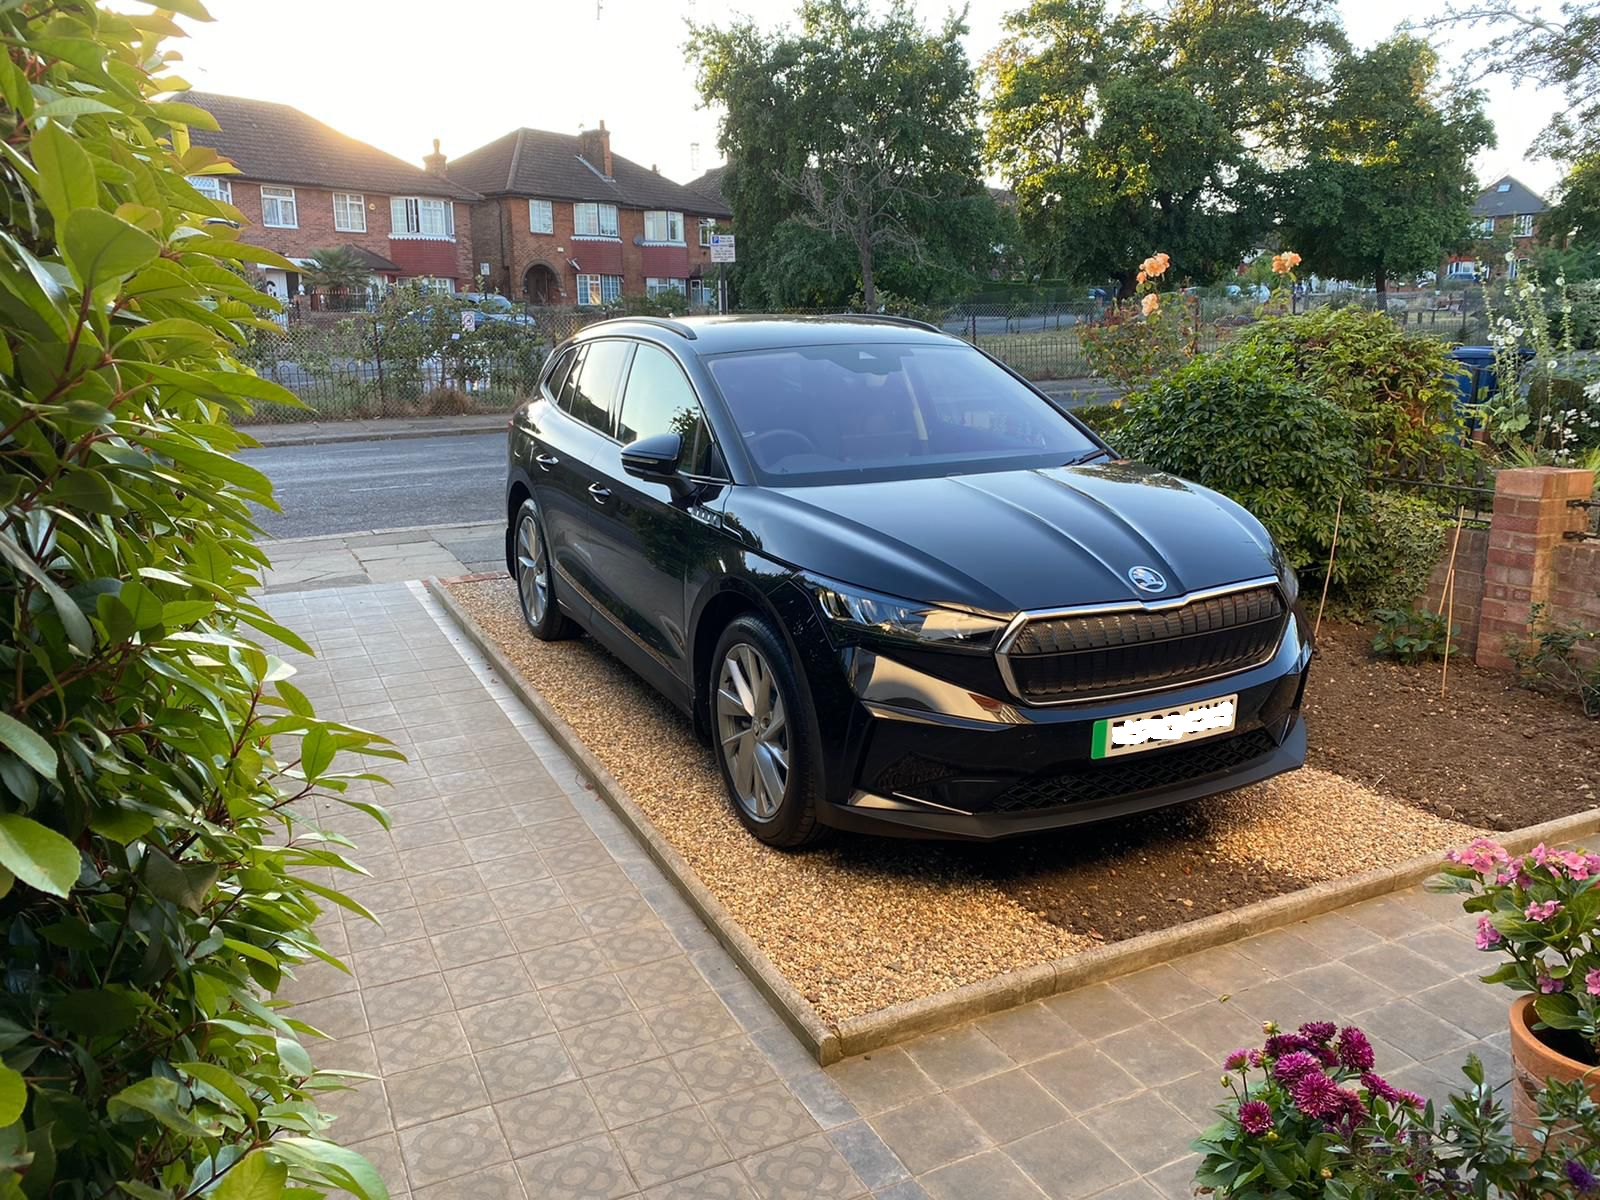 a car parked in a front garden on a newly-created porous surface